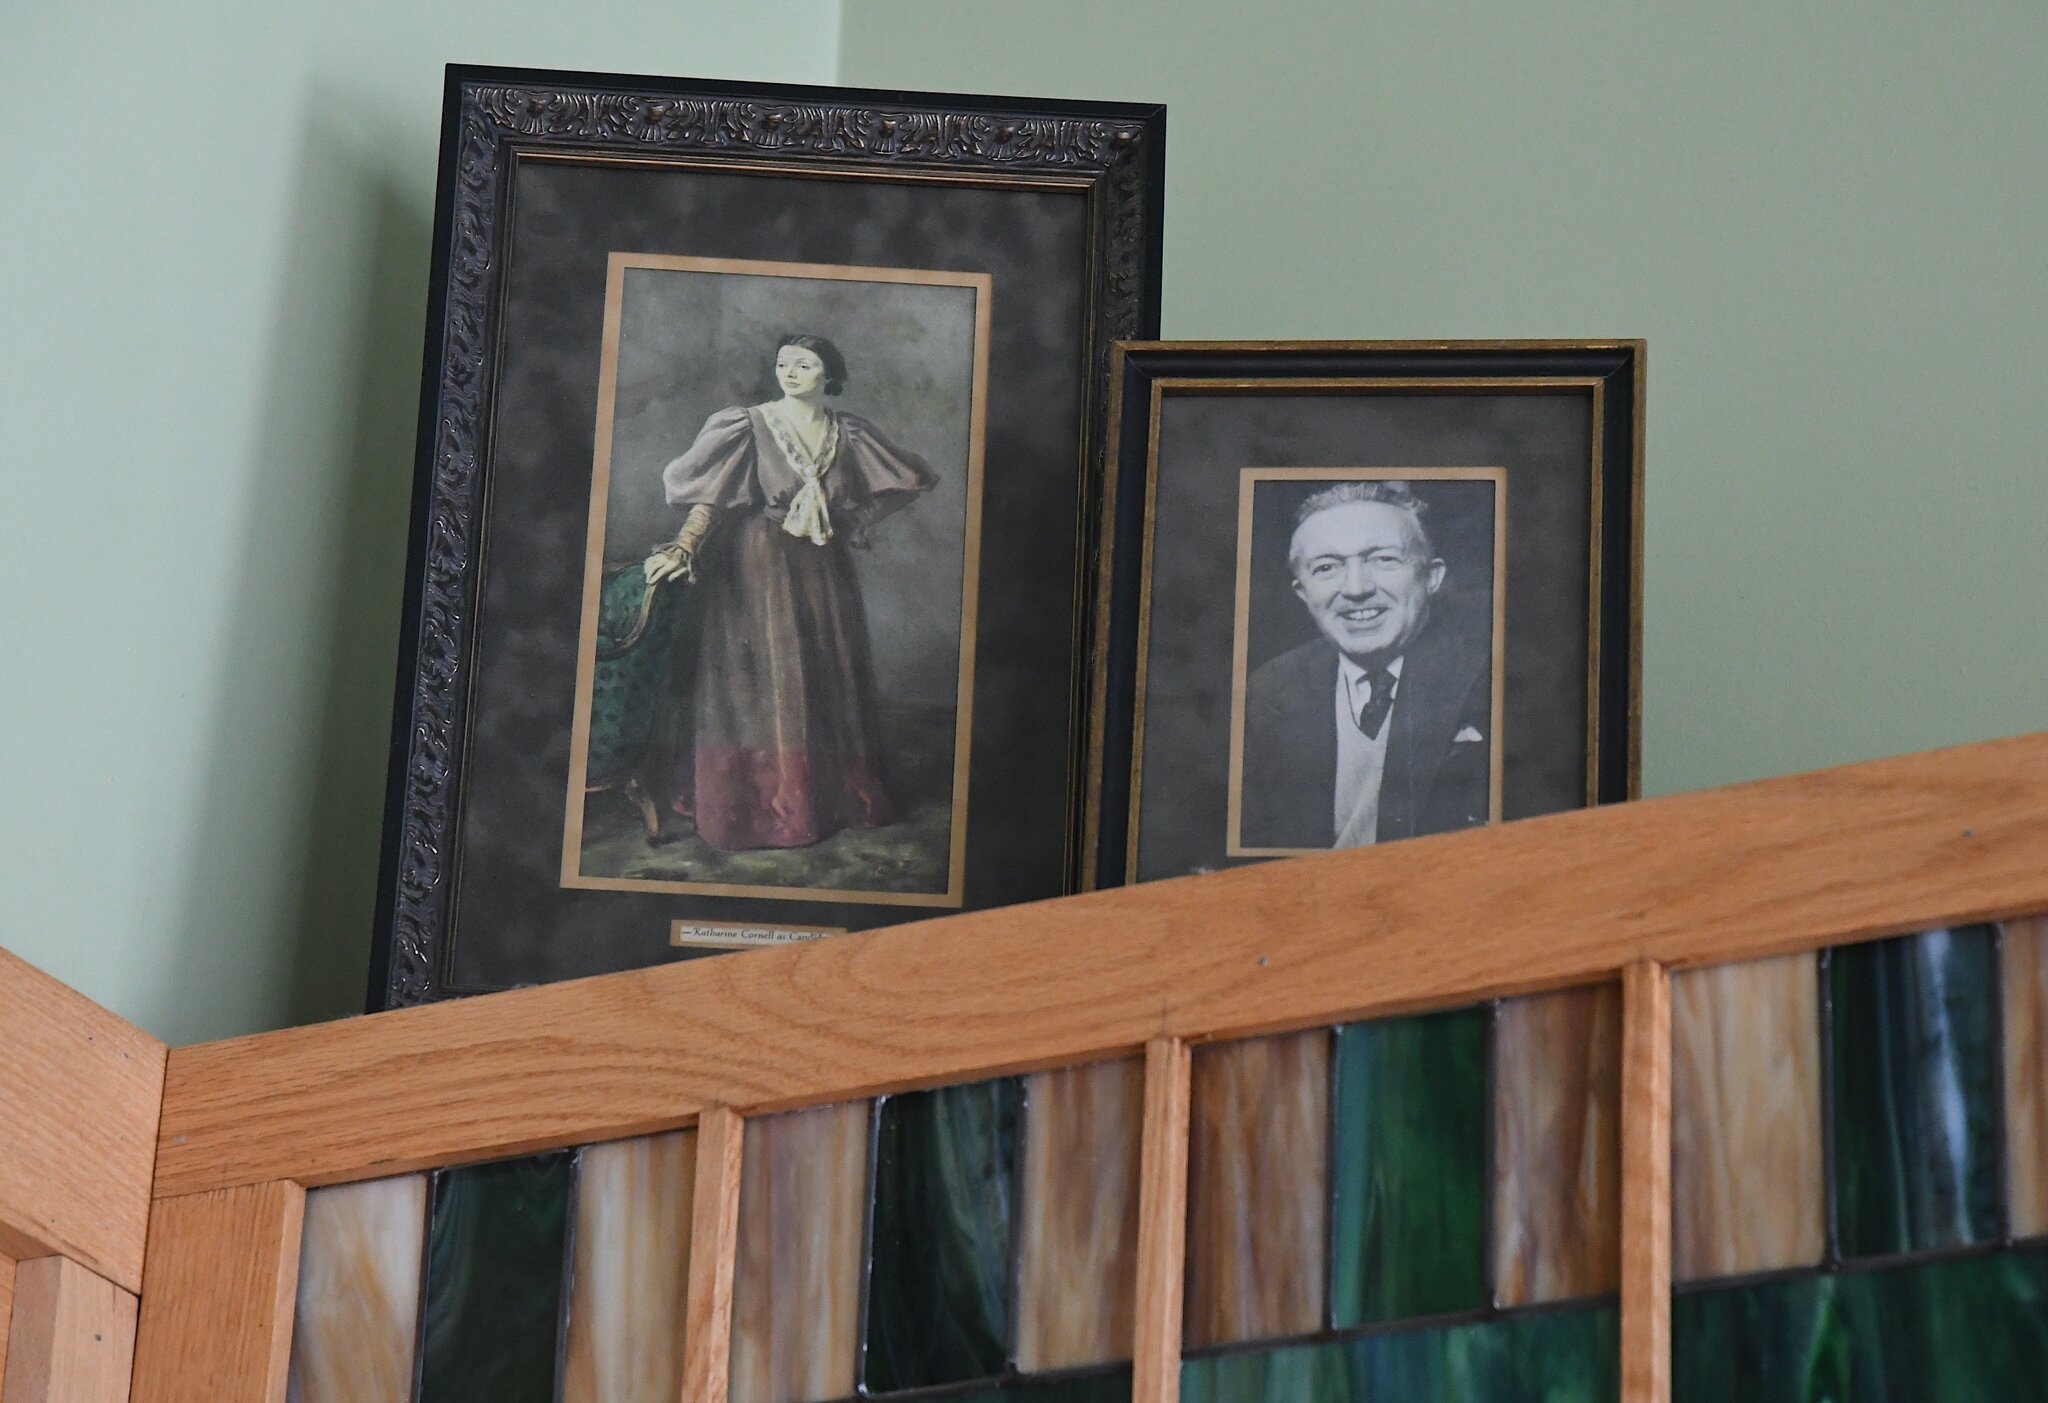 Pictures of the actress Katherine Cornell and her husband, Guthrie McClintic, are on the wall of the Great Escape Stage Company.